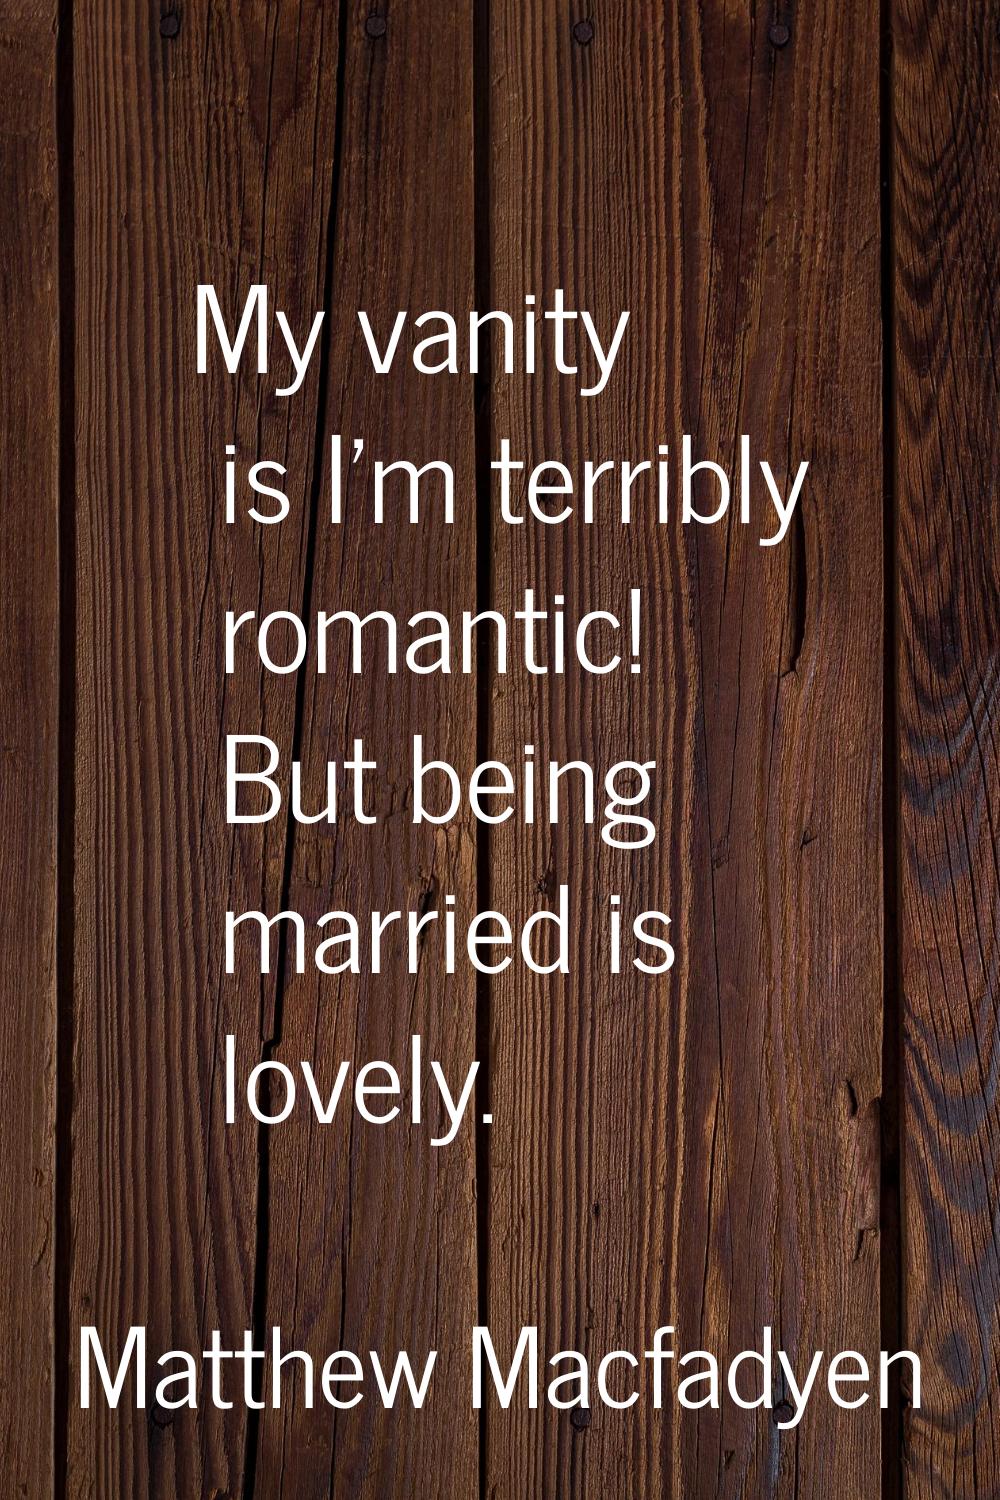 My vanity is I'm terribly romantic! But being married is lovely.